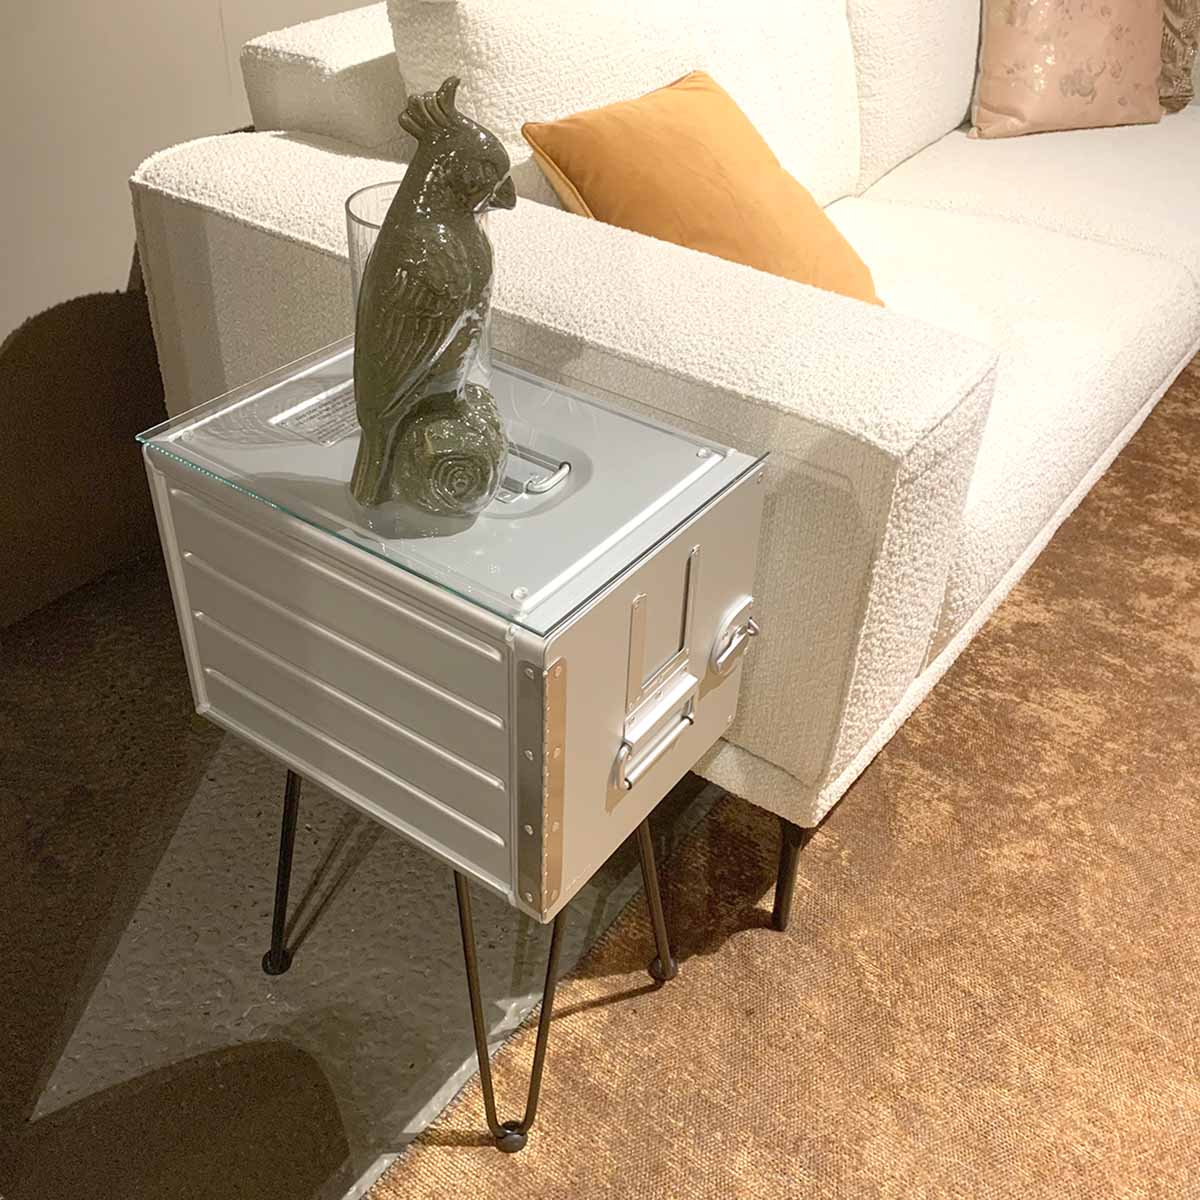 Aircraft galley container side table next to a white couch.